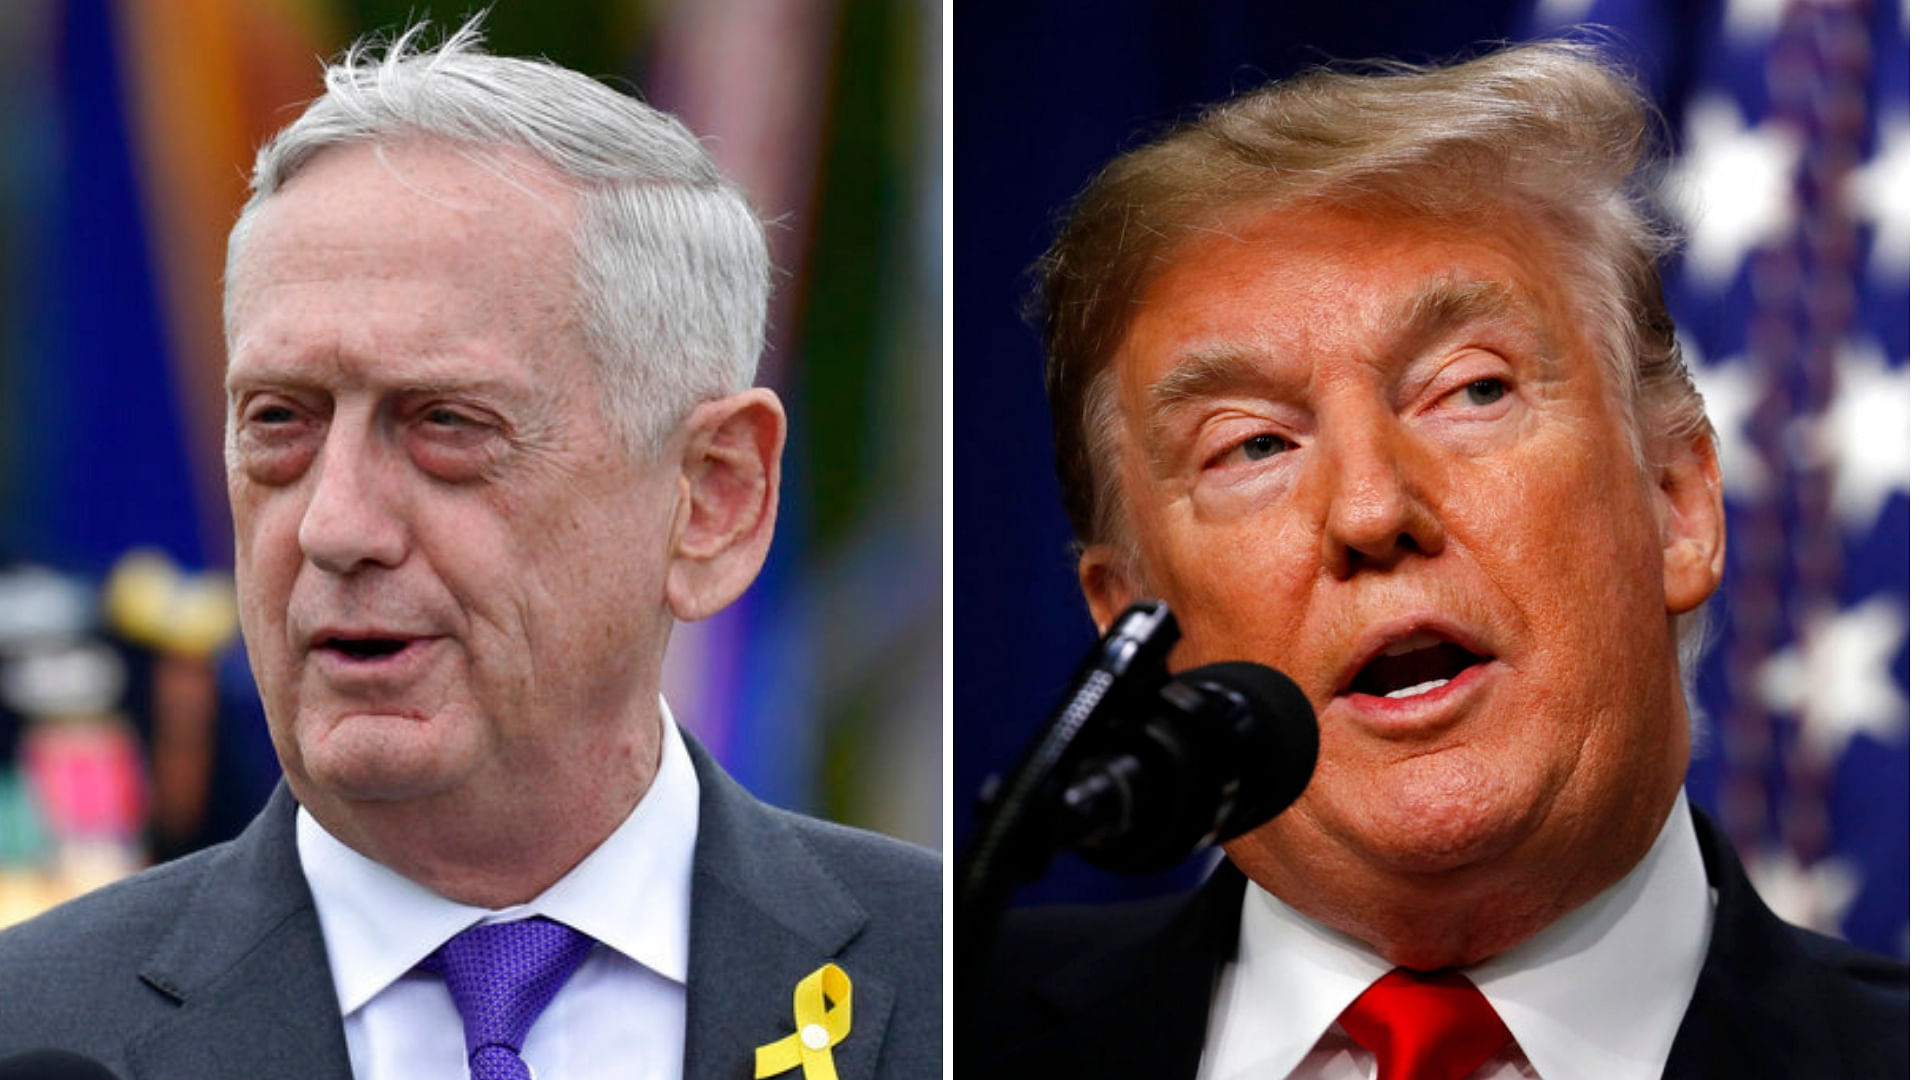 Mattis resigned as the Pentagon chief in December 2018 in protest against Trump’s Syria policy.